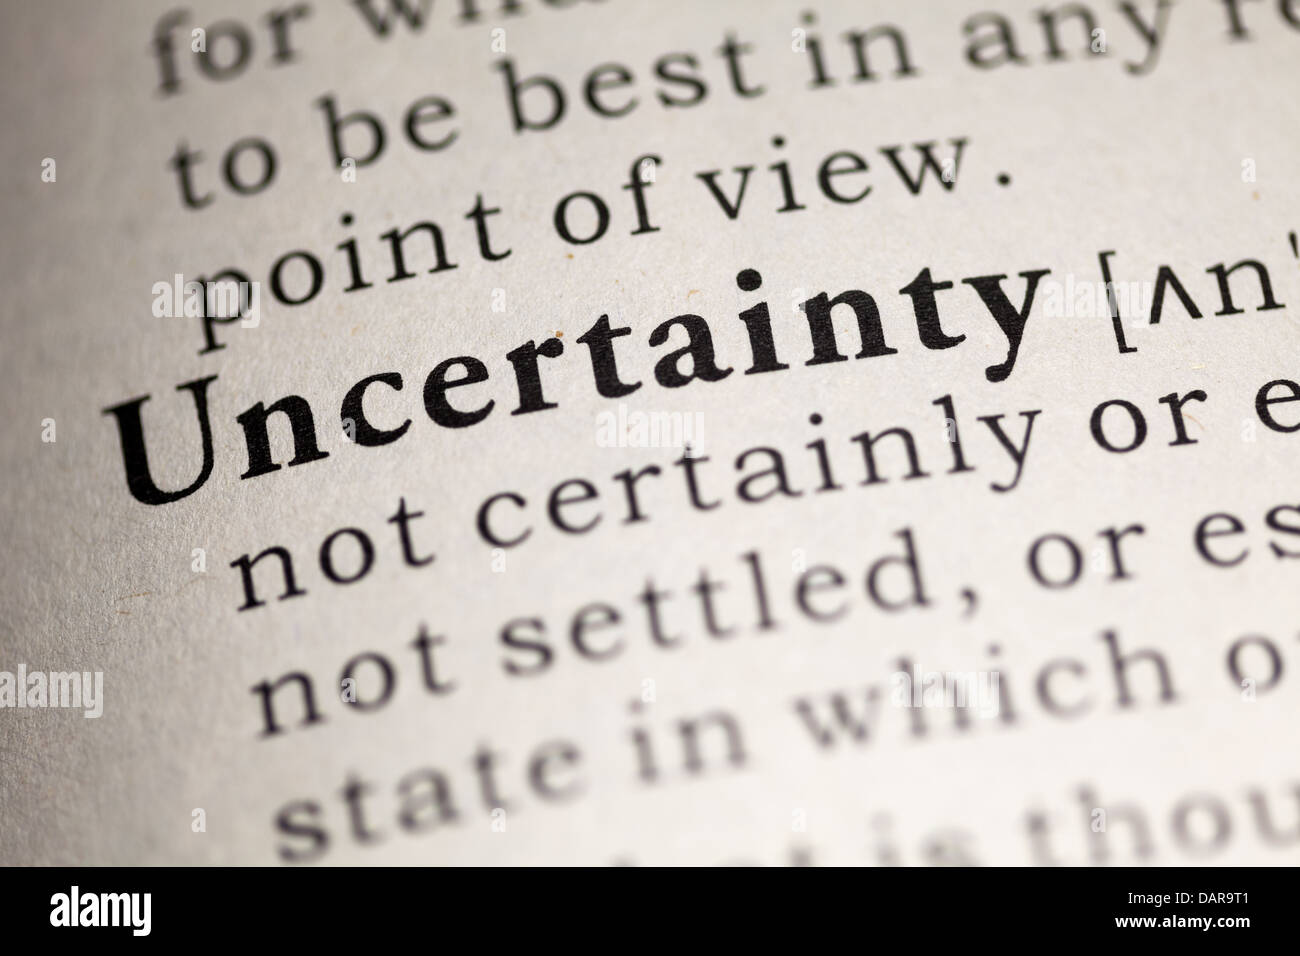 Fake Dictionary, Dictionary definition of the word Uncertainty. Stock Photo